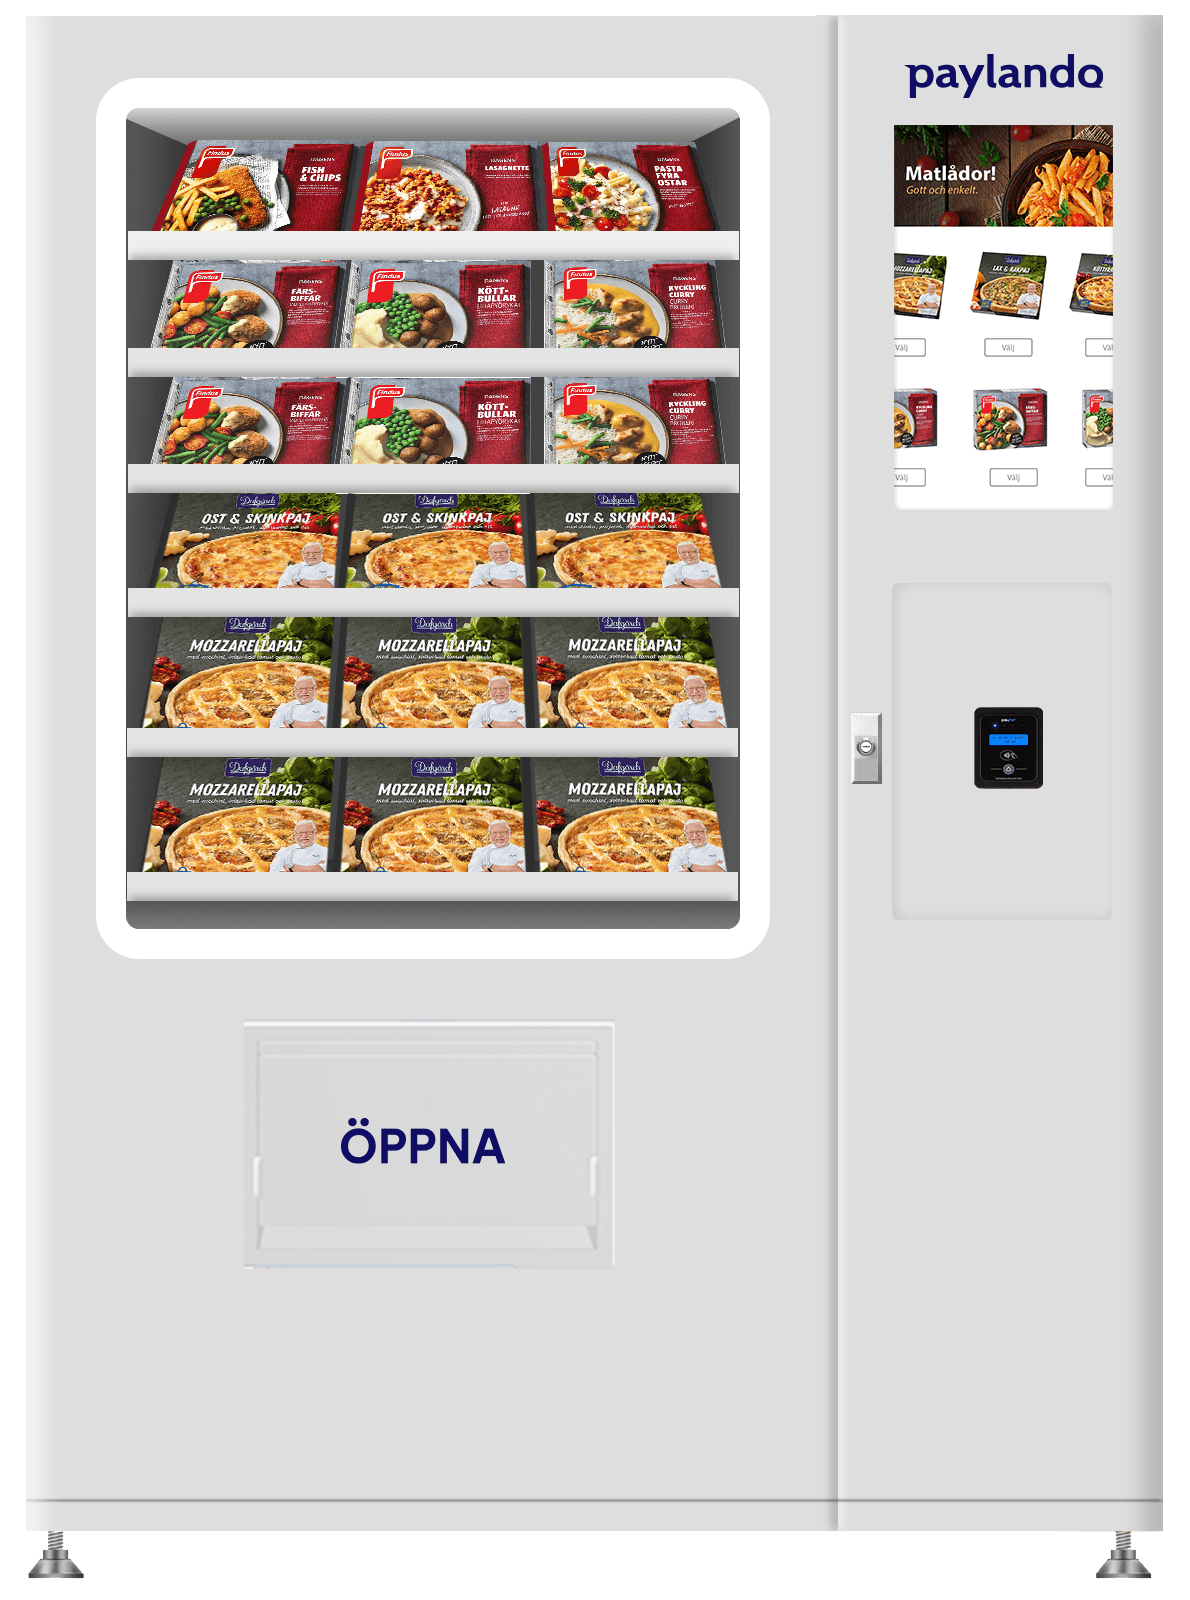 Paylando Maxi Combo: Refrigerated vending machine with lift for both food and drink